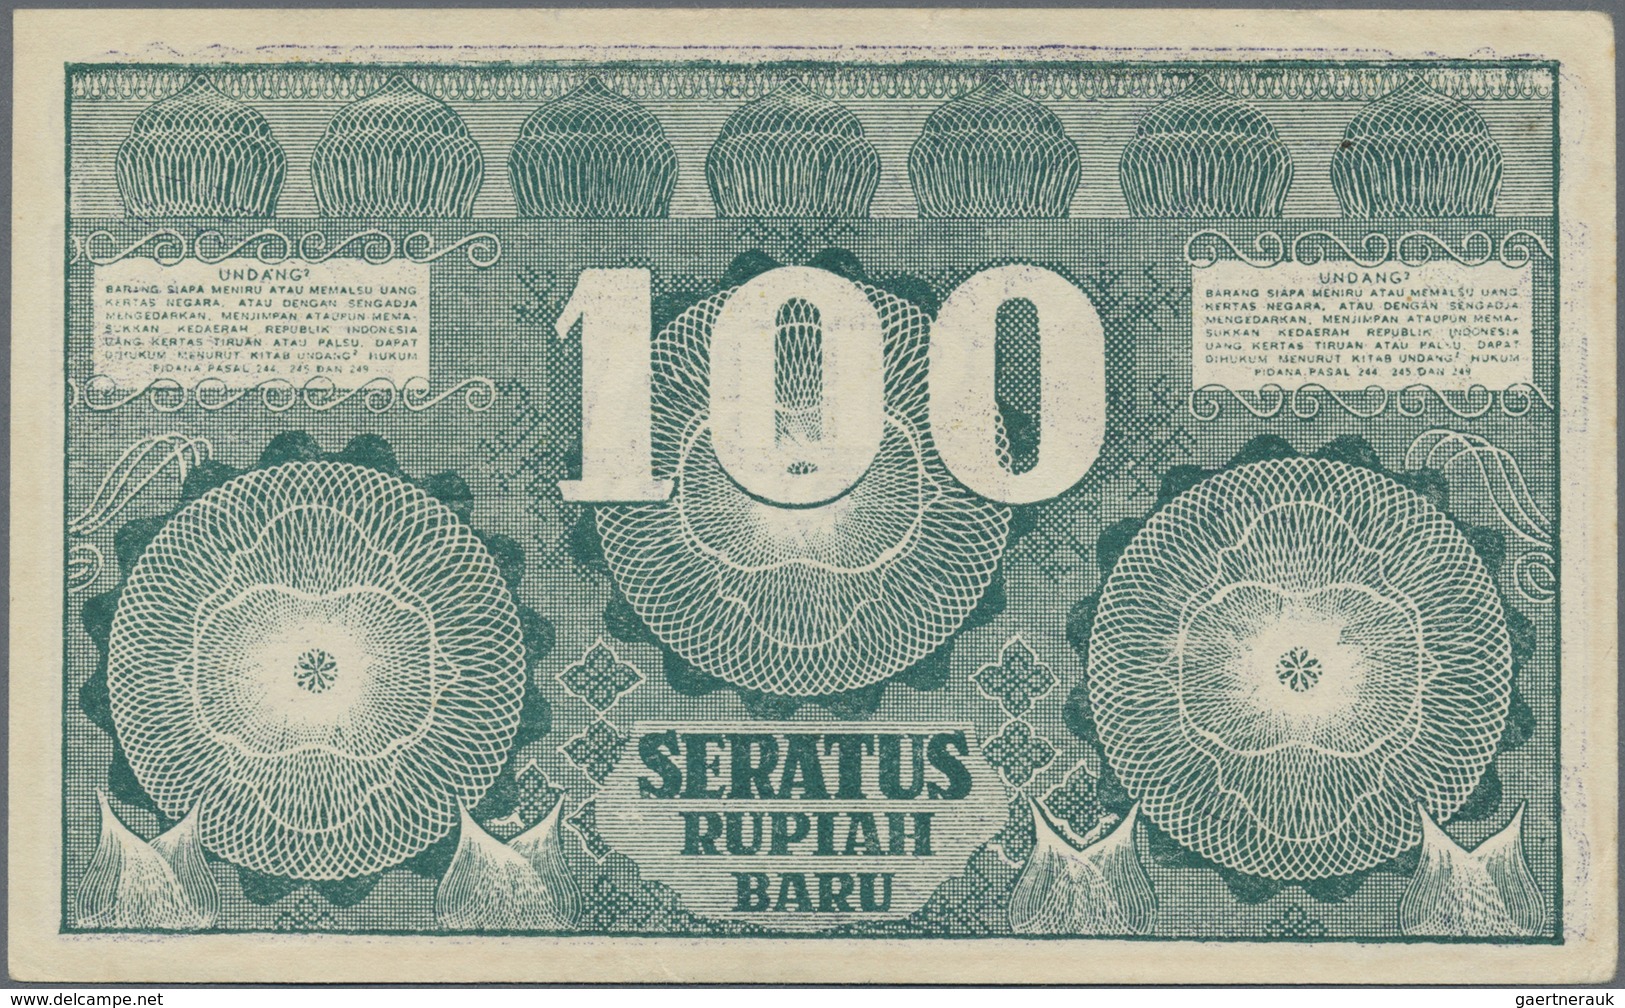 Indonesia / Indonesien: 100 Rupiah 1949 P. 35G, Unfolded, Light Creases At Borders, No Holes Or Tear - Indonesia